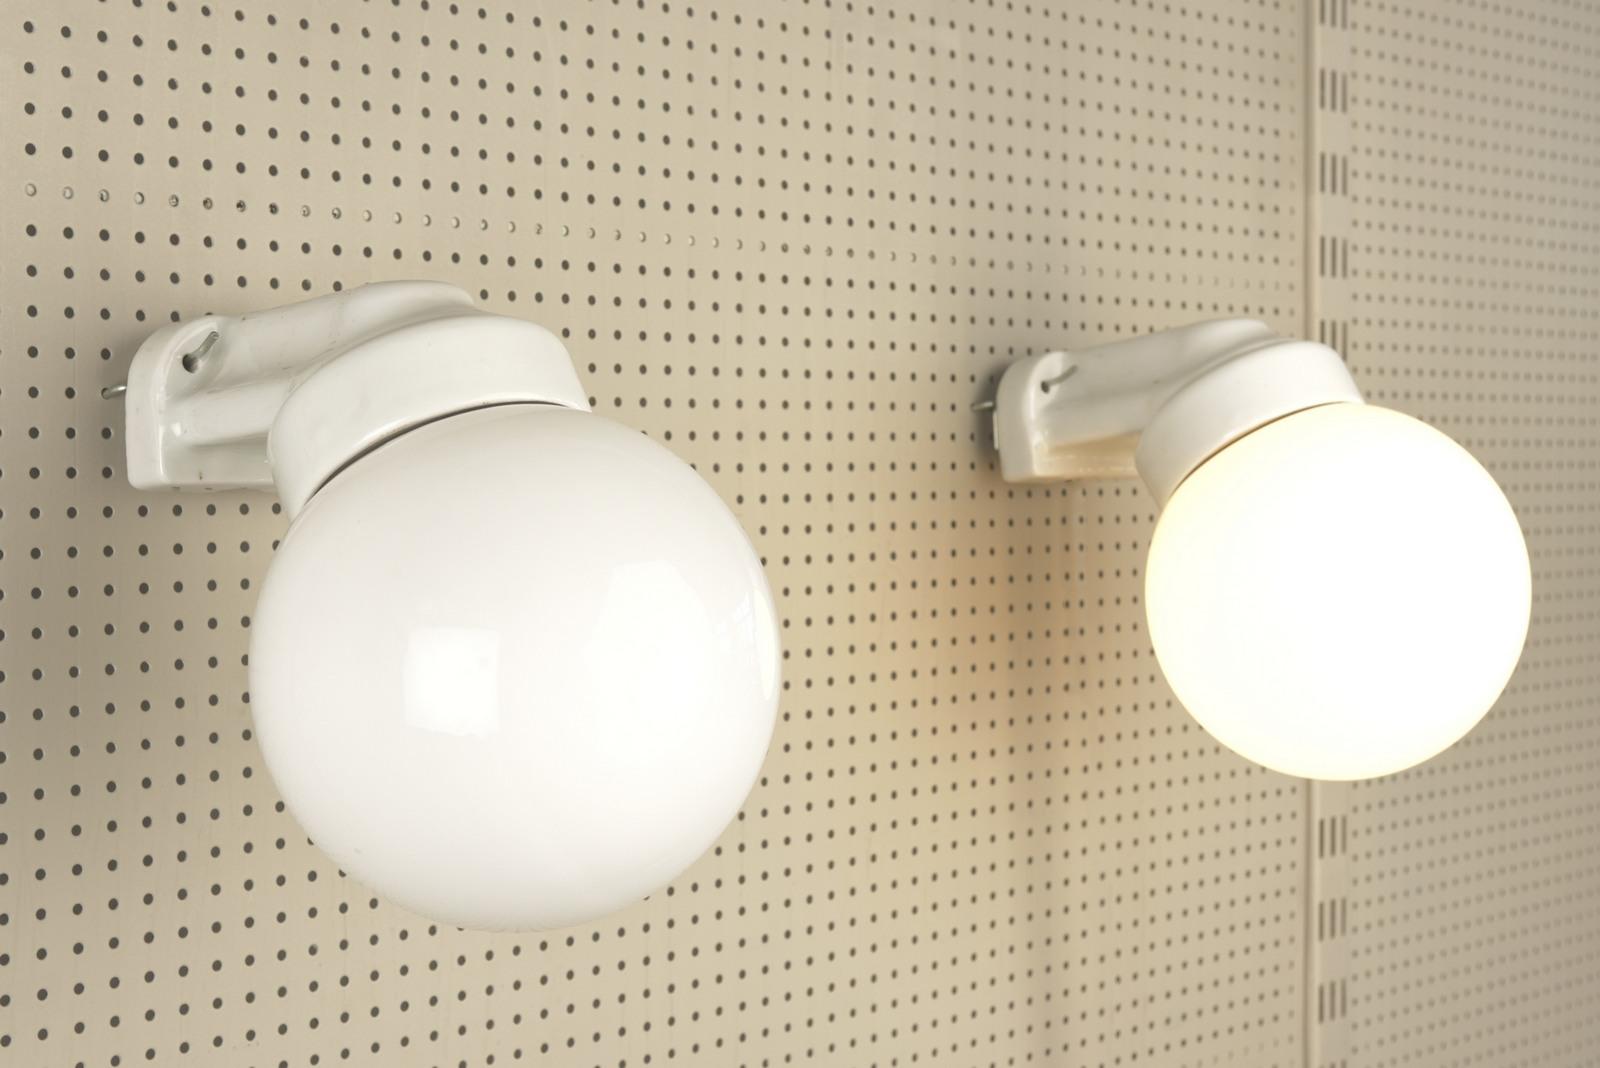 Mid-20th Century Pair of Outdoor Wall Lights in Porcelain and Milk Glass, Germany - 1935 For Sale